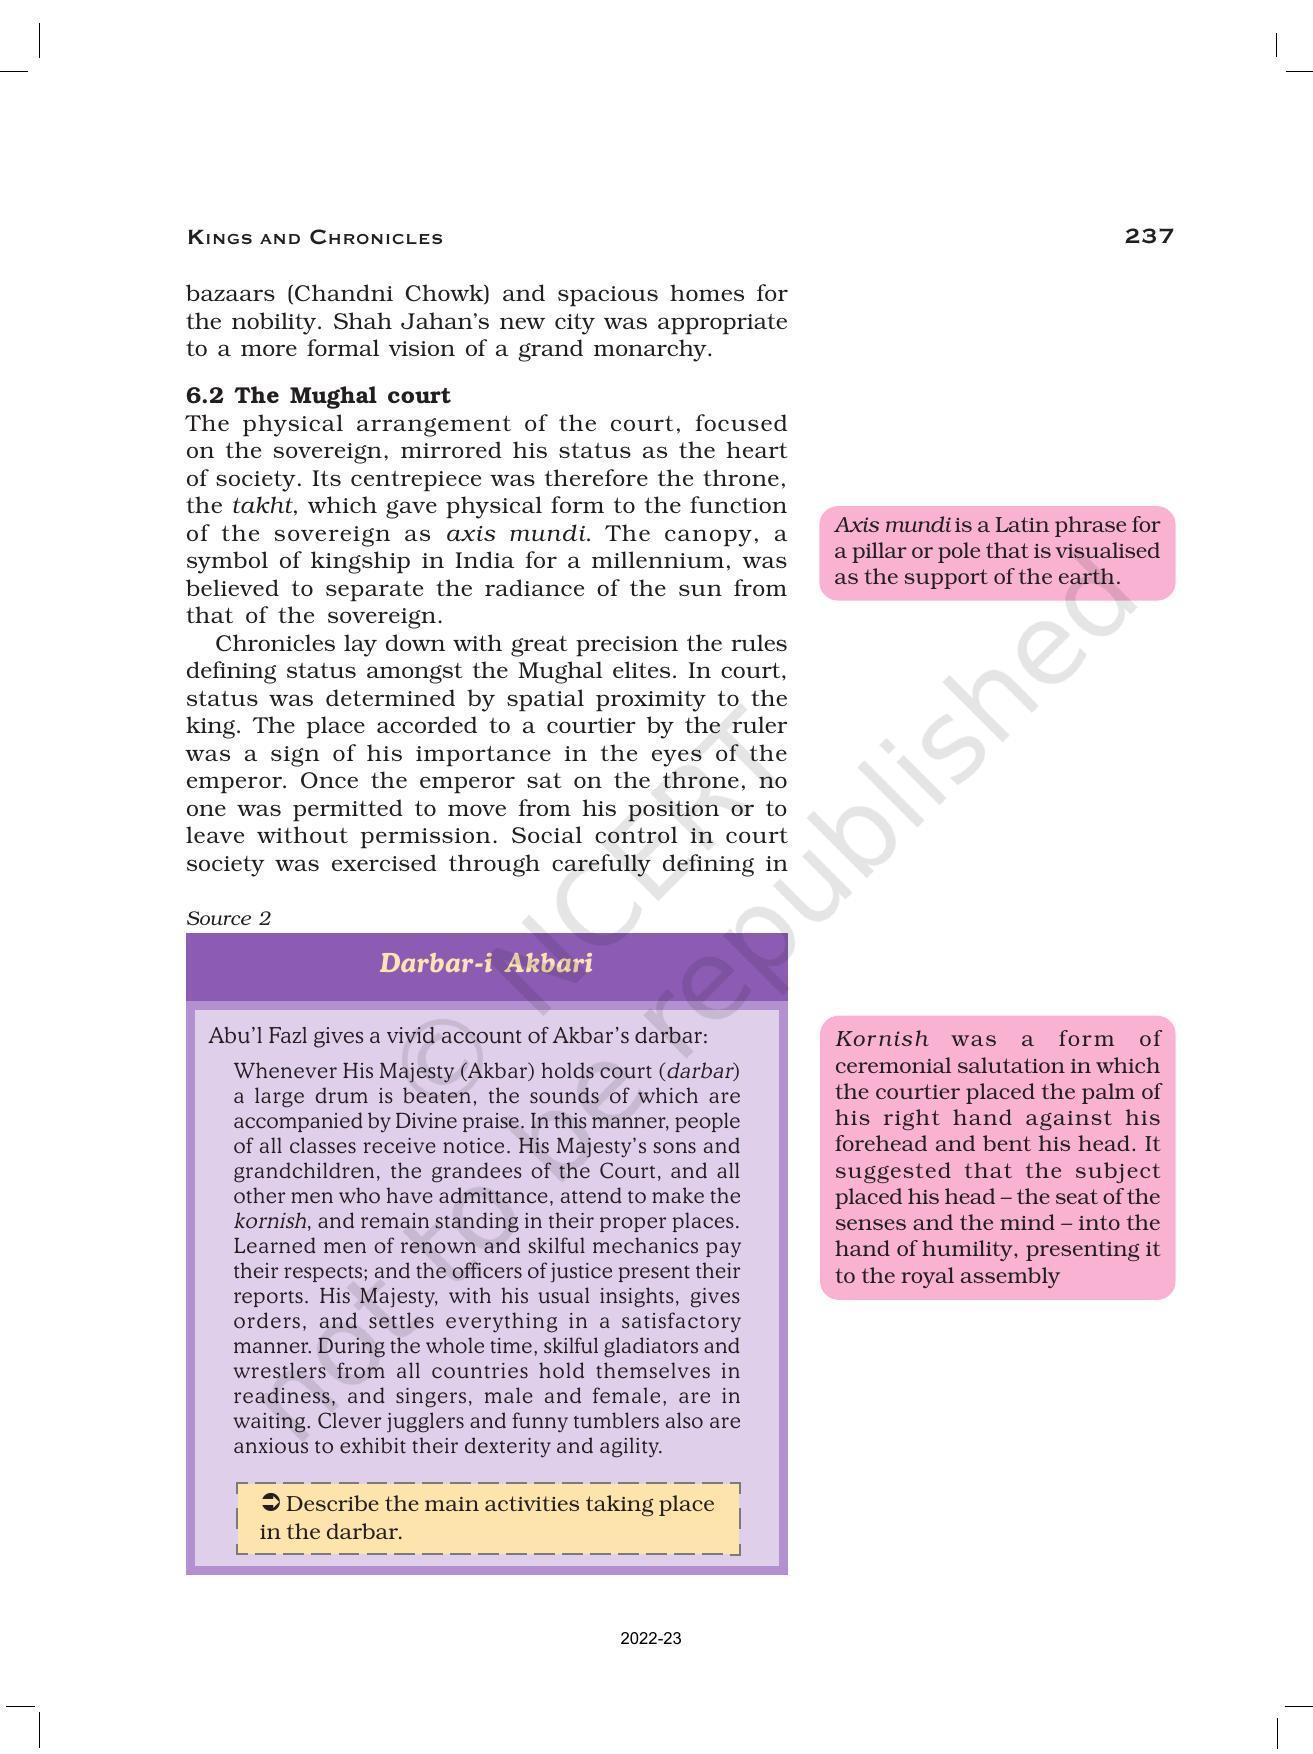 NCERT Book for Class 12 History (Part-II) Chapter 9 Kings and Chronicles - Page 14